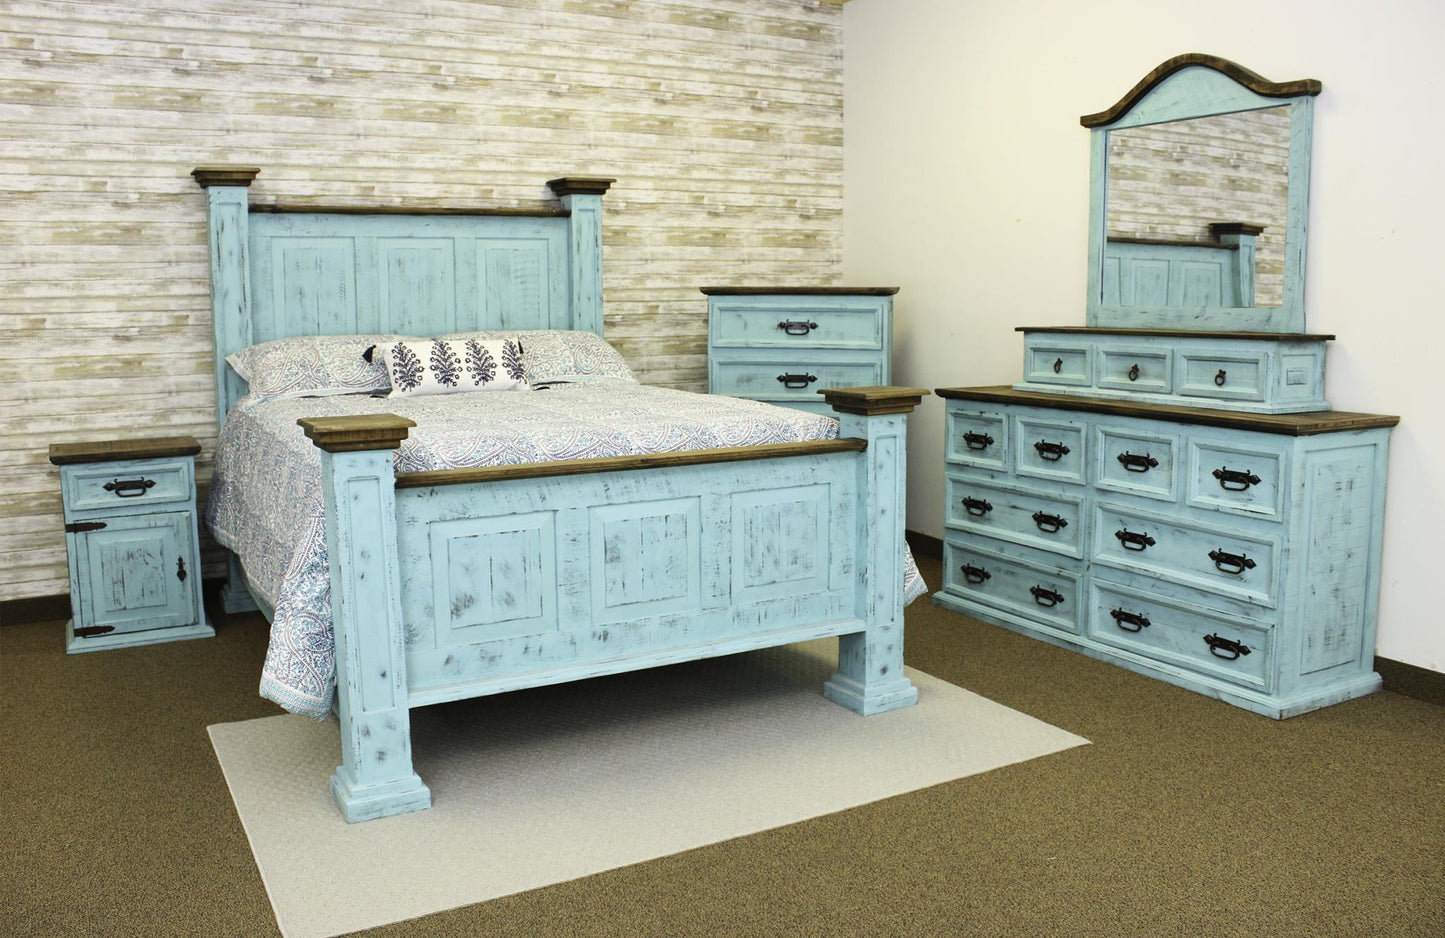 Rustic Turquoise Oasis Bedroom Set at Walker Mattress and Furniture Locations in Cedar Park and Belton TX.